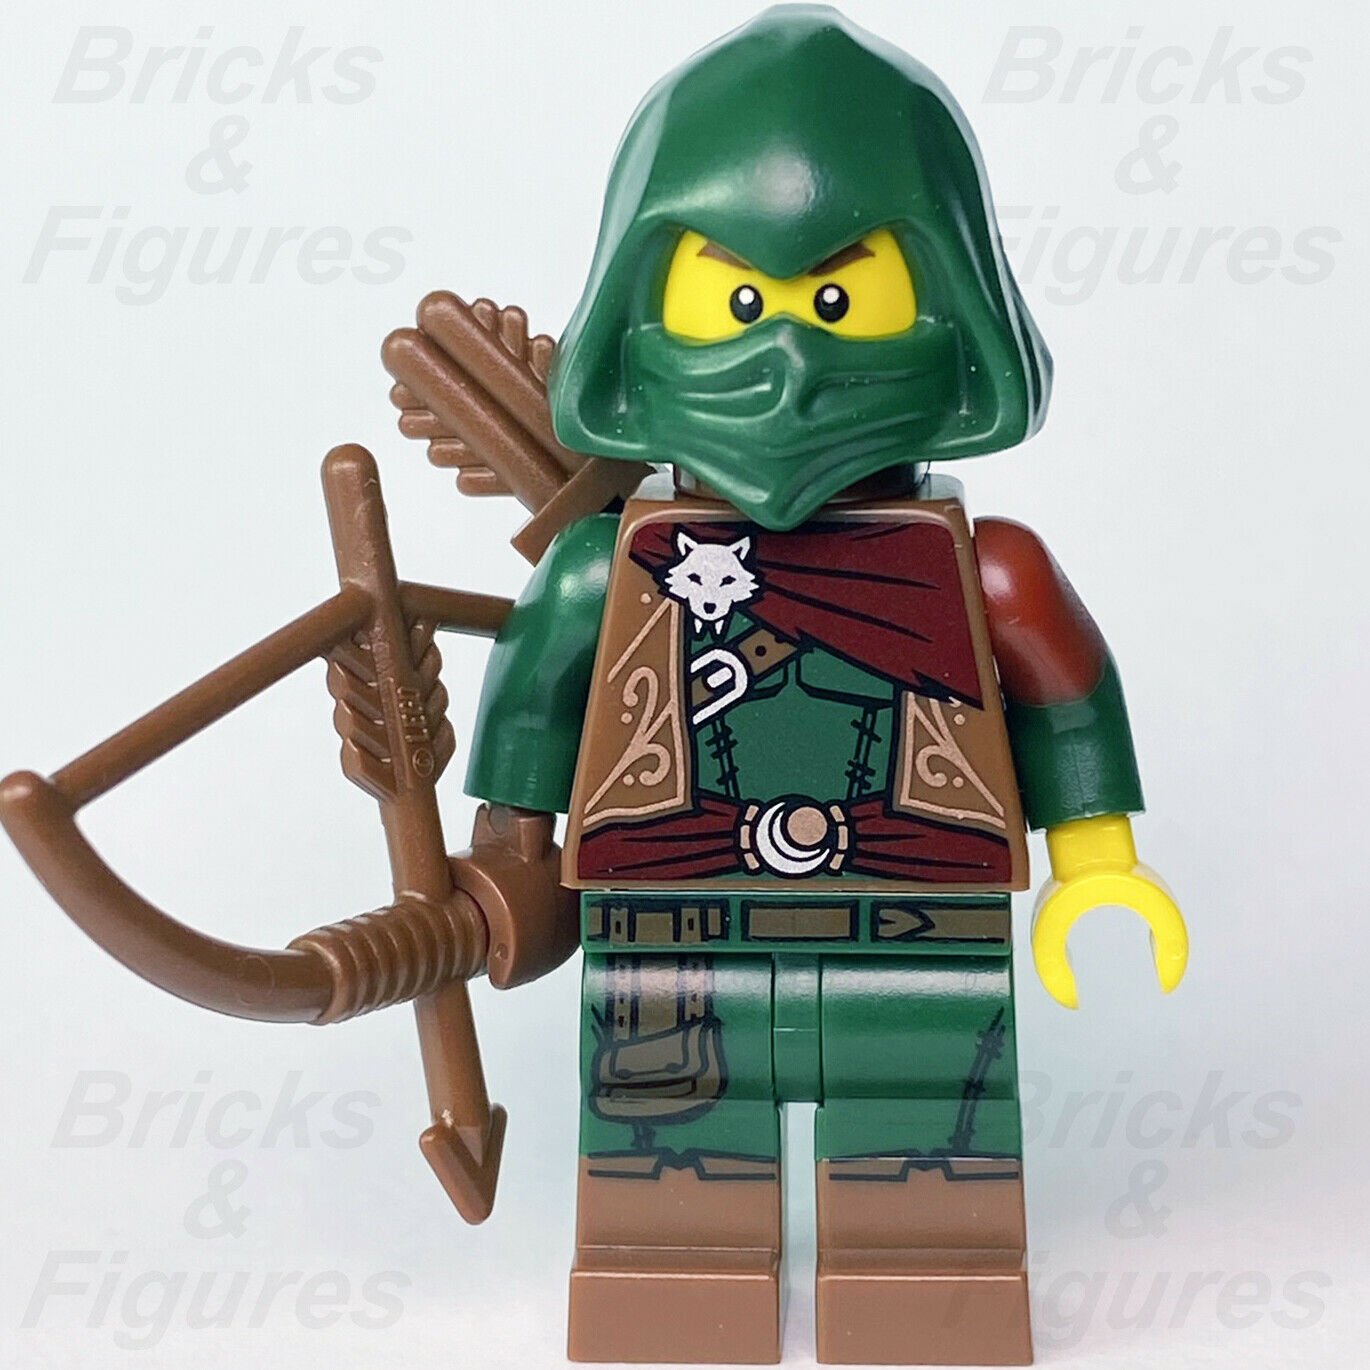 New Collectible Minifigures LEGO Rogue Archer Series 16 Minifig 71013 col16-11 - Bricks & Figures